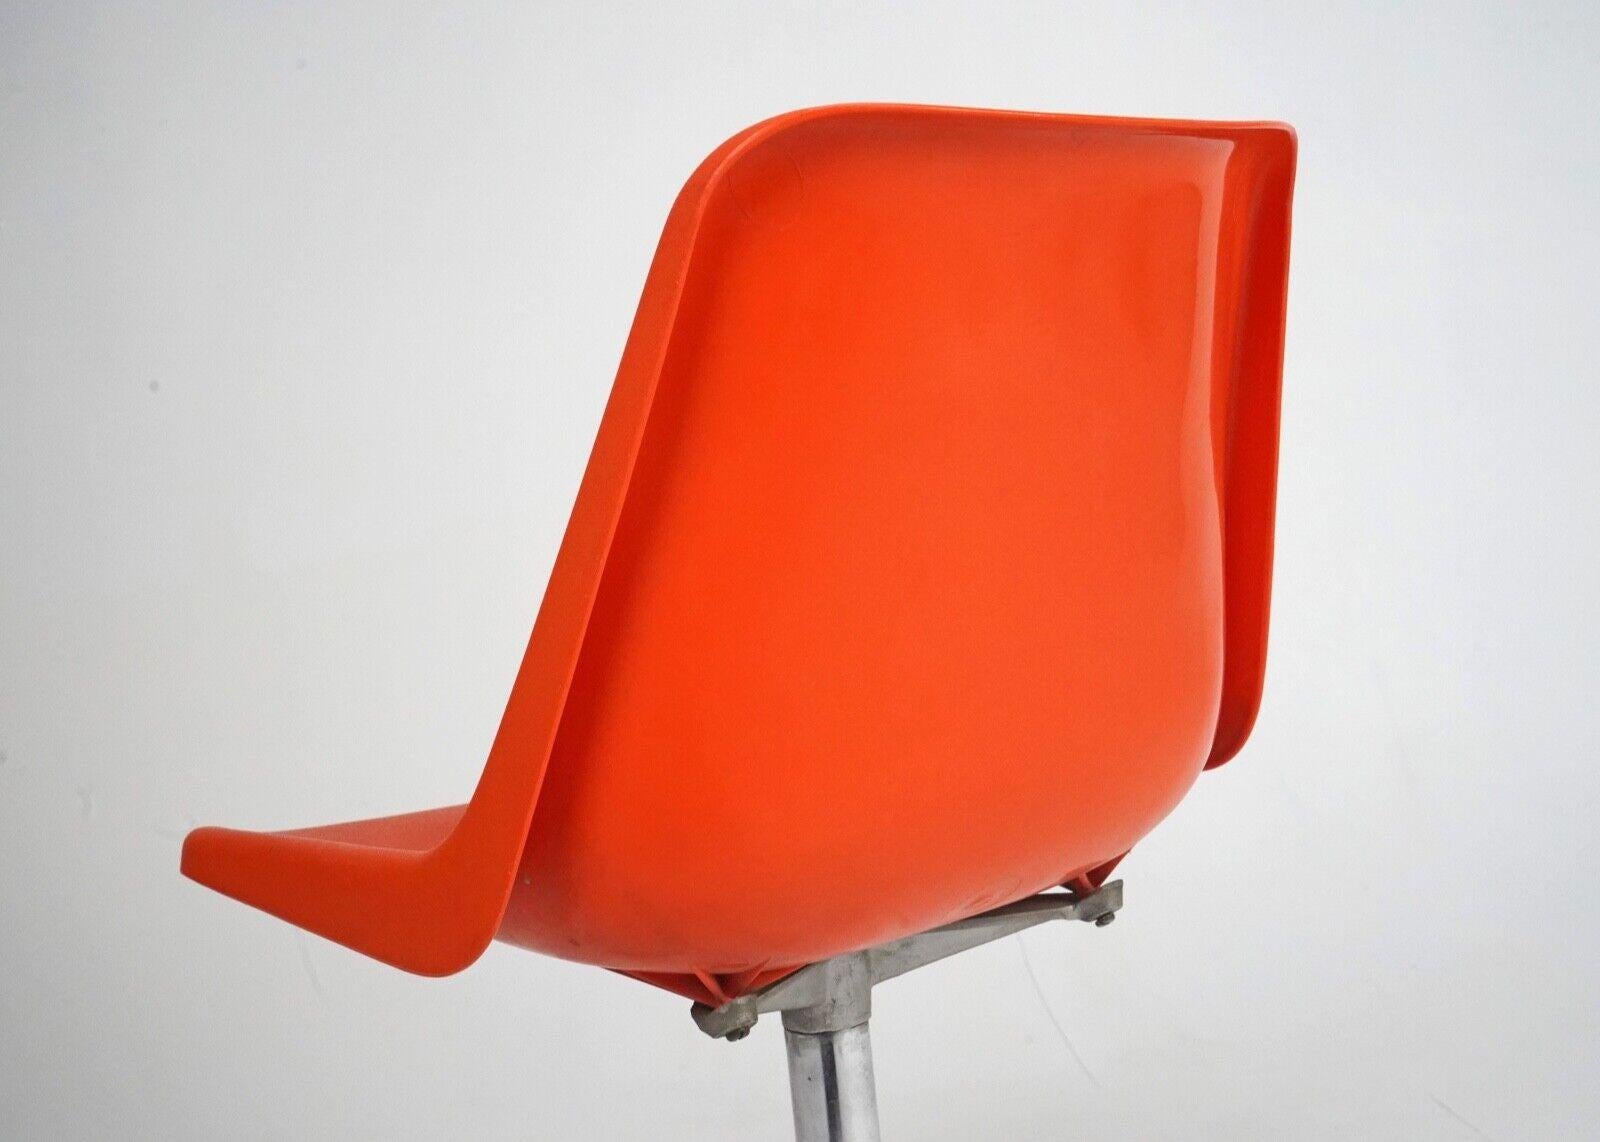 A 1960s orange polypropylene swivel chair on casters.
Designed by Robin Day for Hille.
Very Good vintage condition. 

Condition 
Please do take a careful look at all our pictures and note that these are antique or vintage pieces that will show